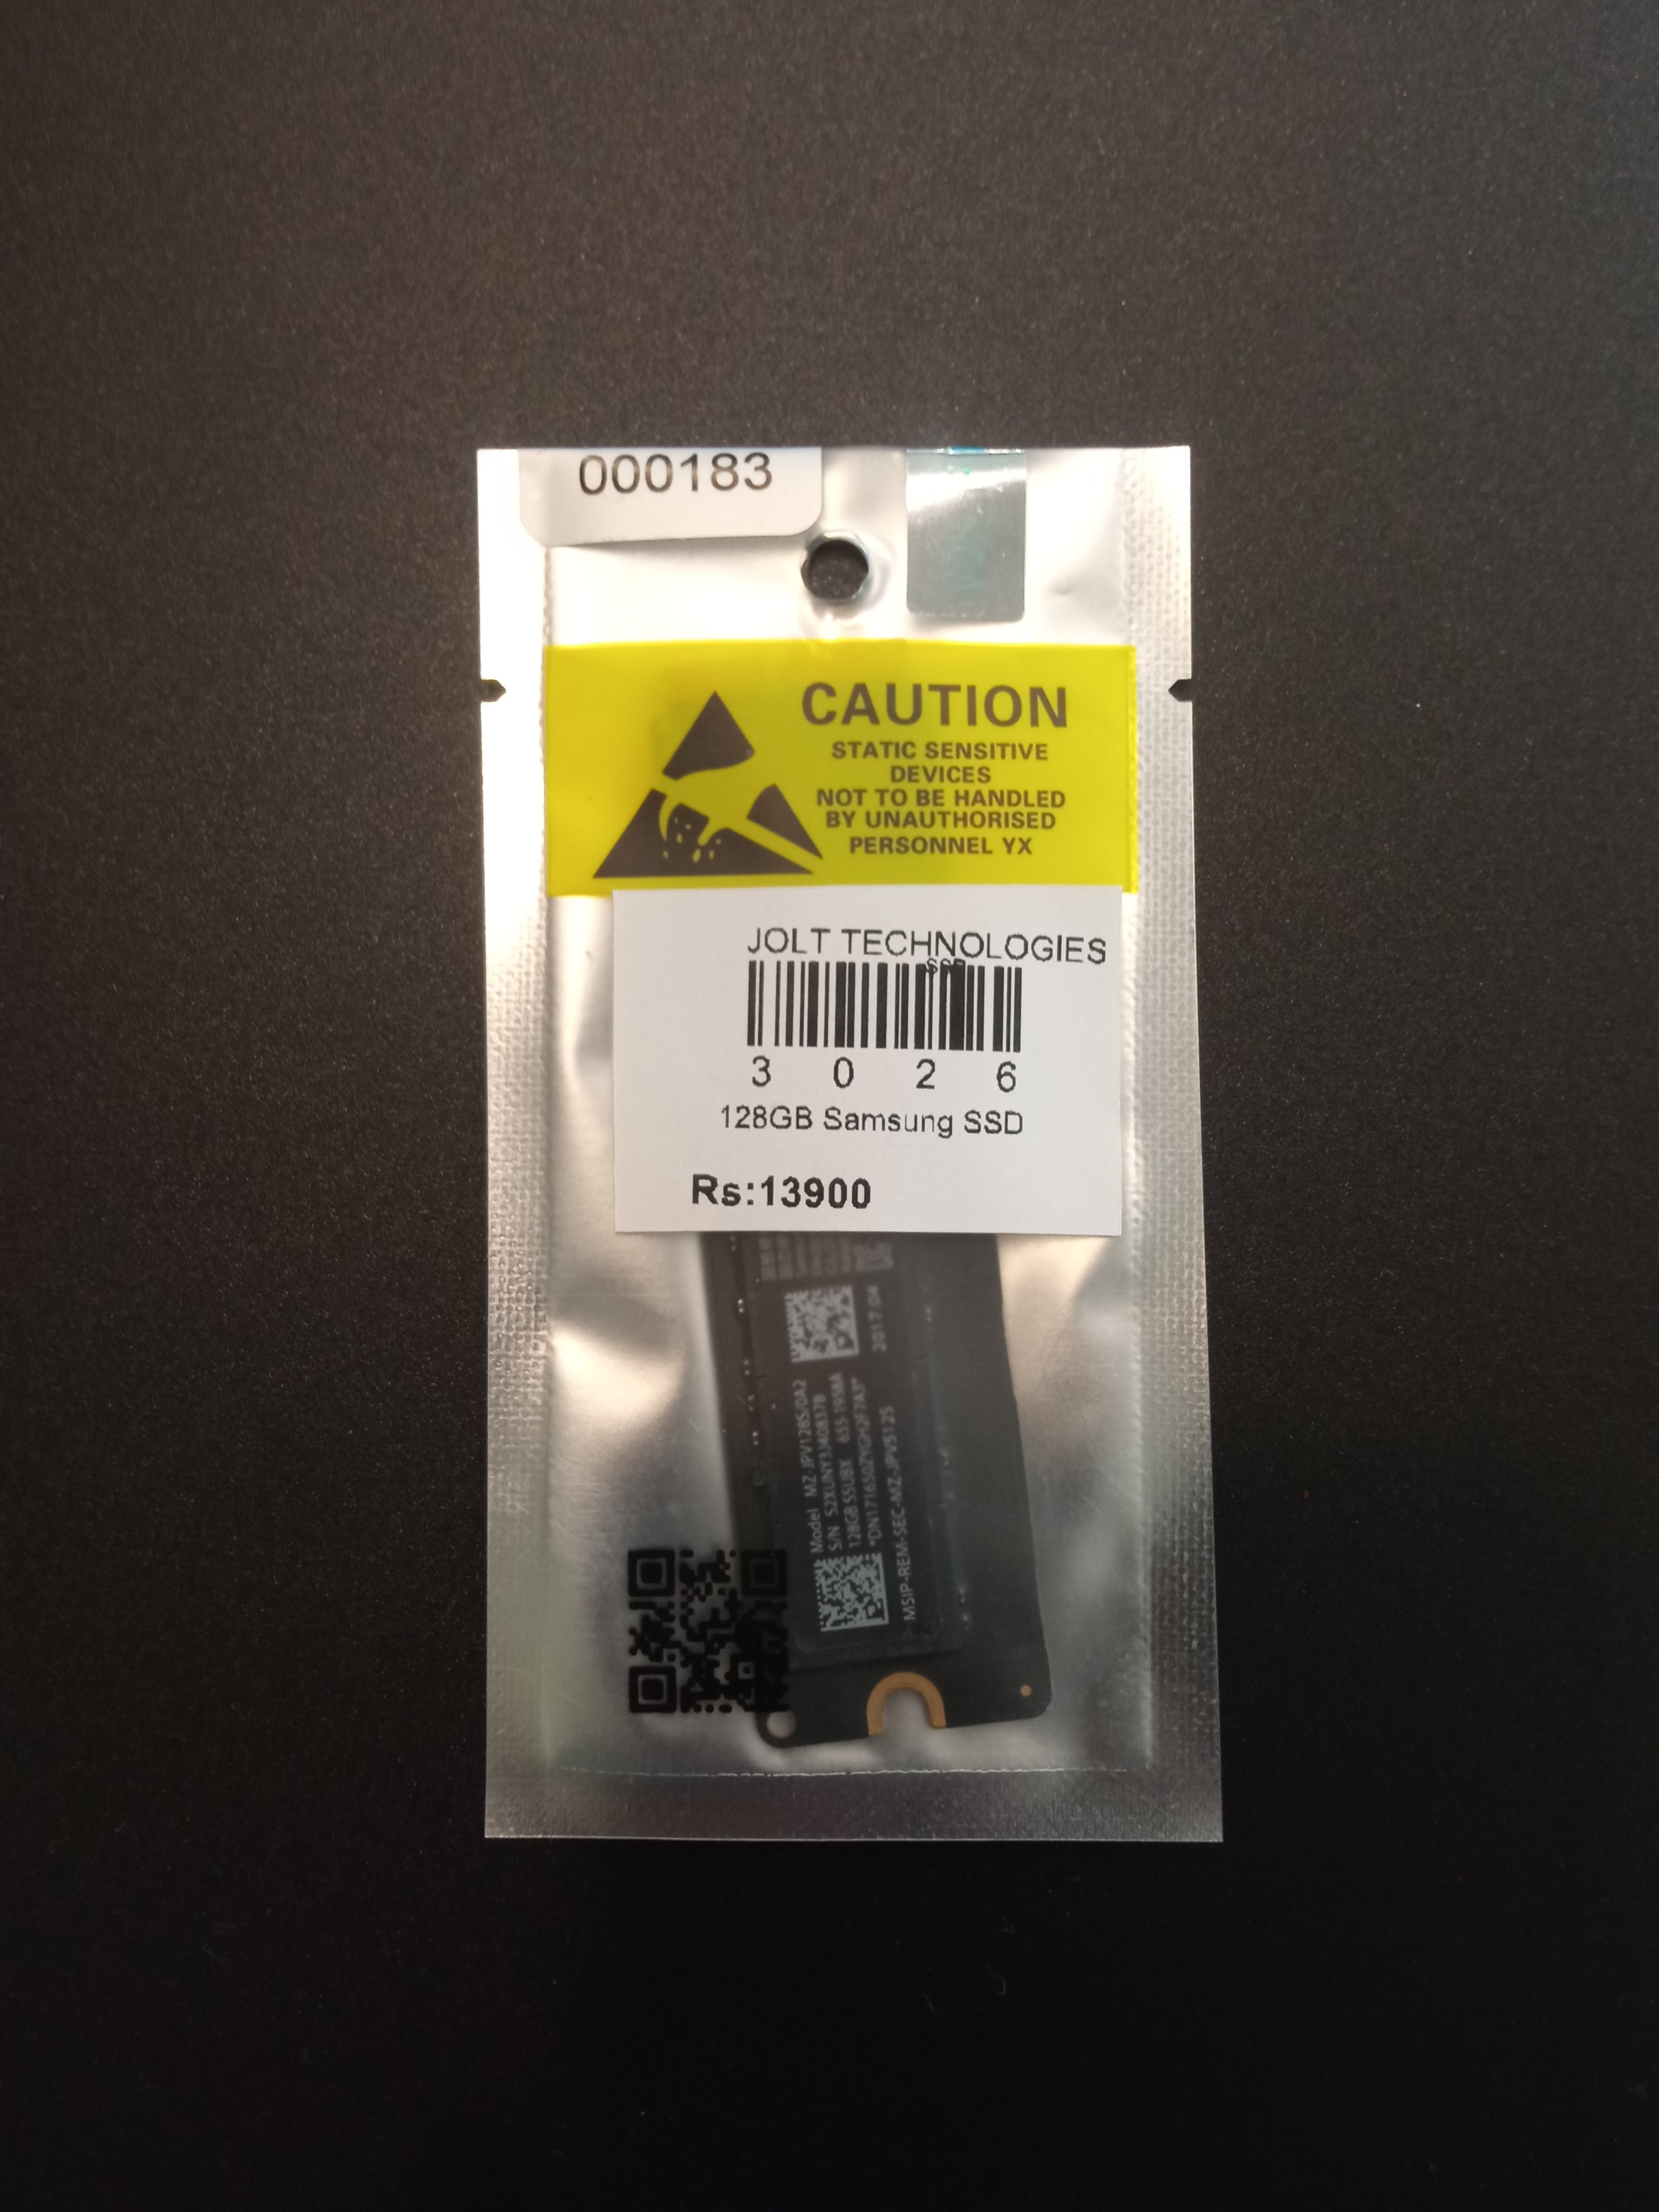 Genuine Samsung 128GB SSD for MacBook Air and Pro - One Year Warranty